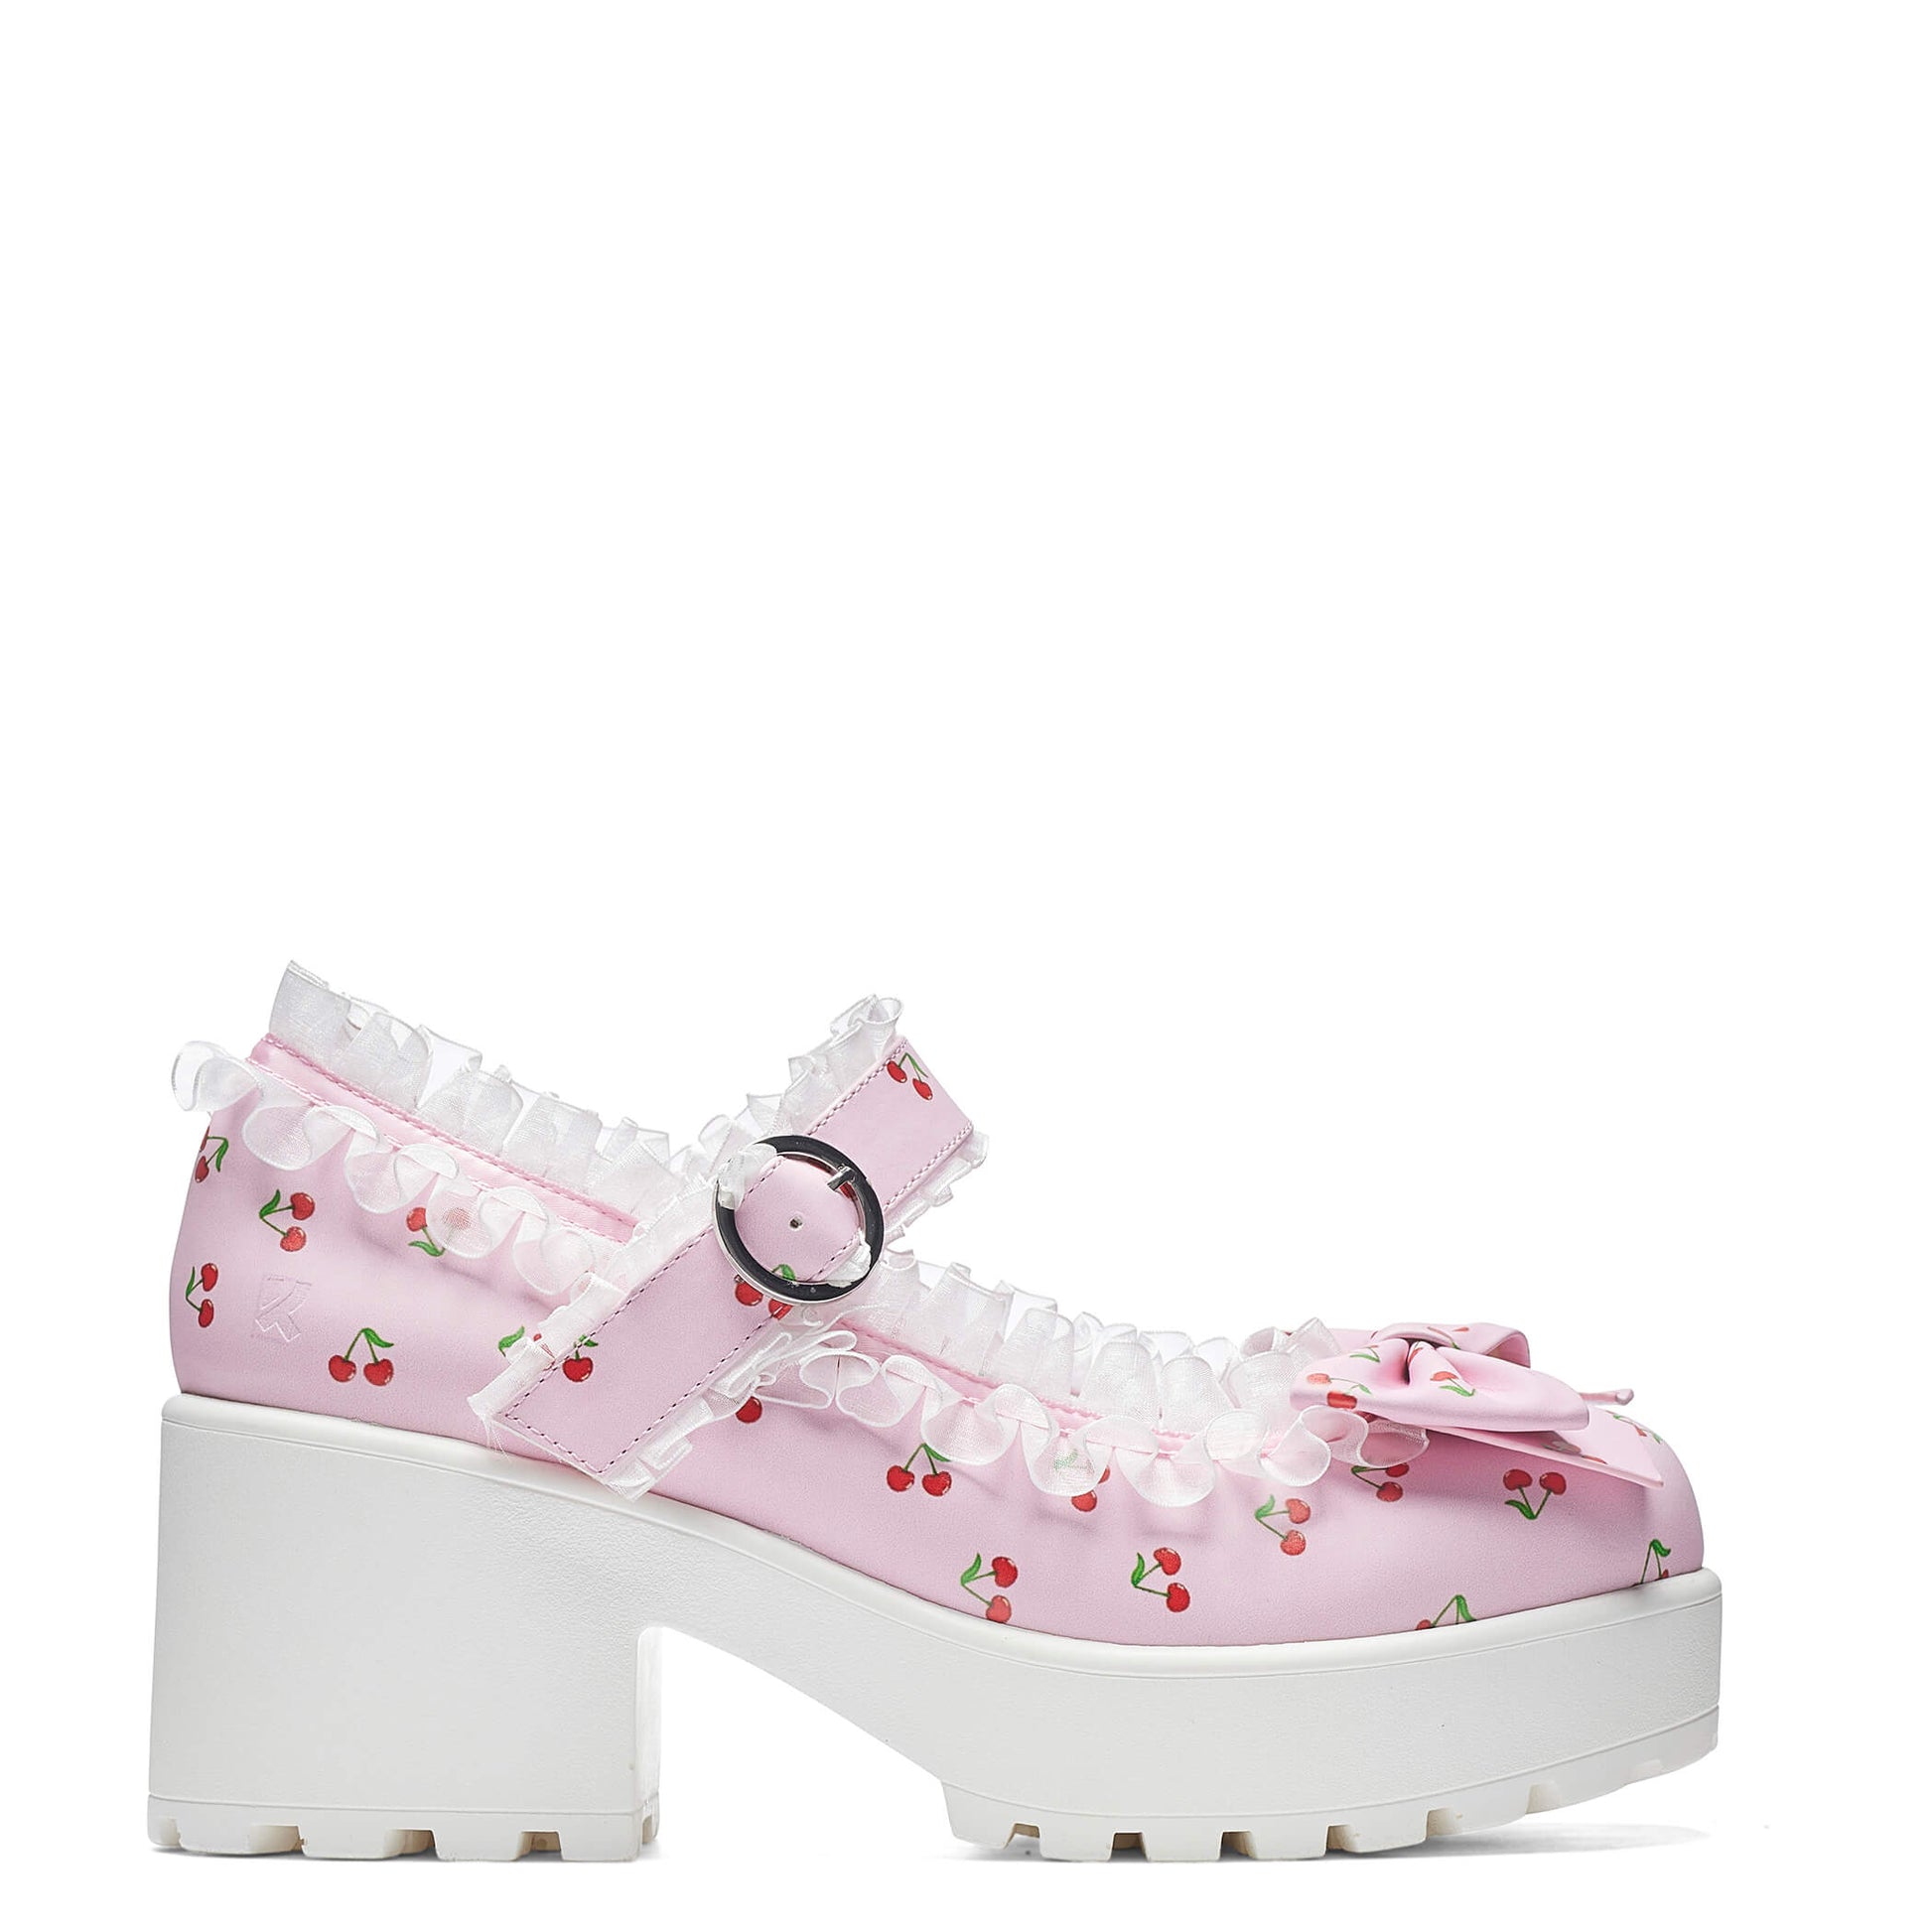 Tira Mary Janes Shoes 'Pink Cherry Bakewell Edition' - Mary Janes - KOI Footwear - Pink - Side View